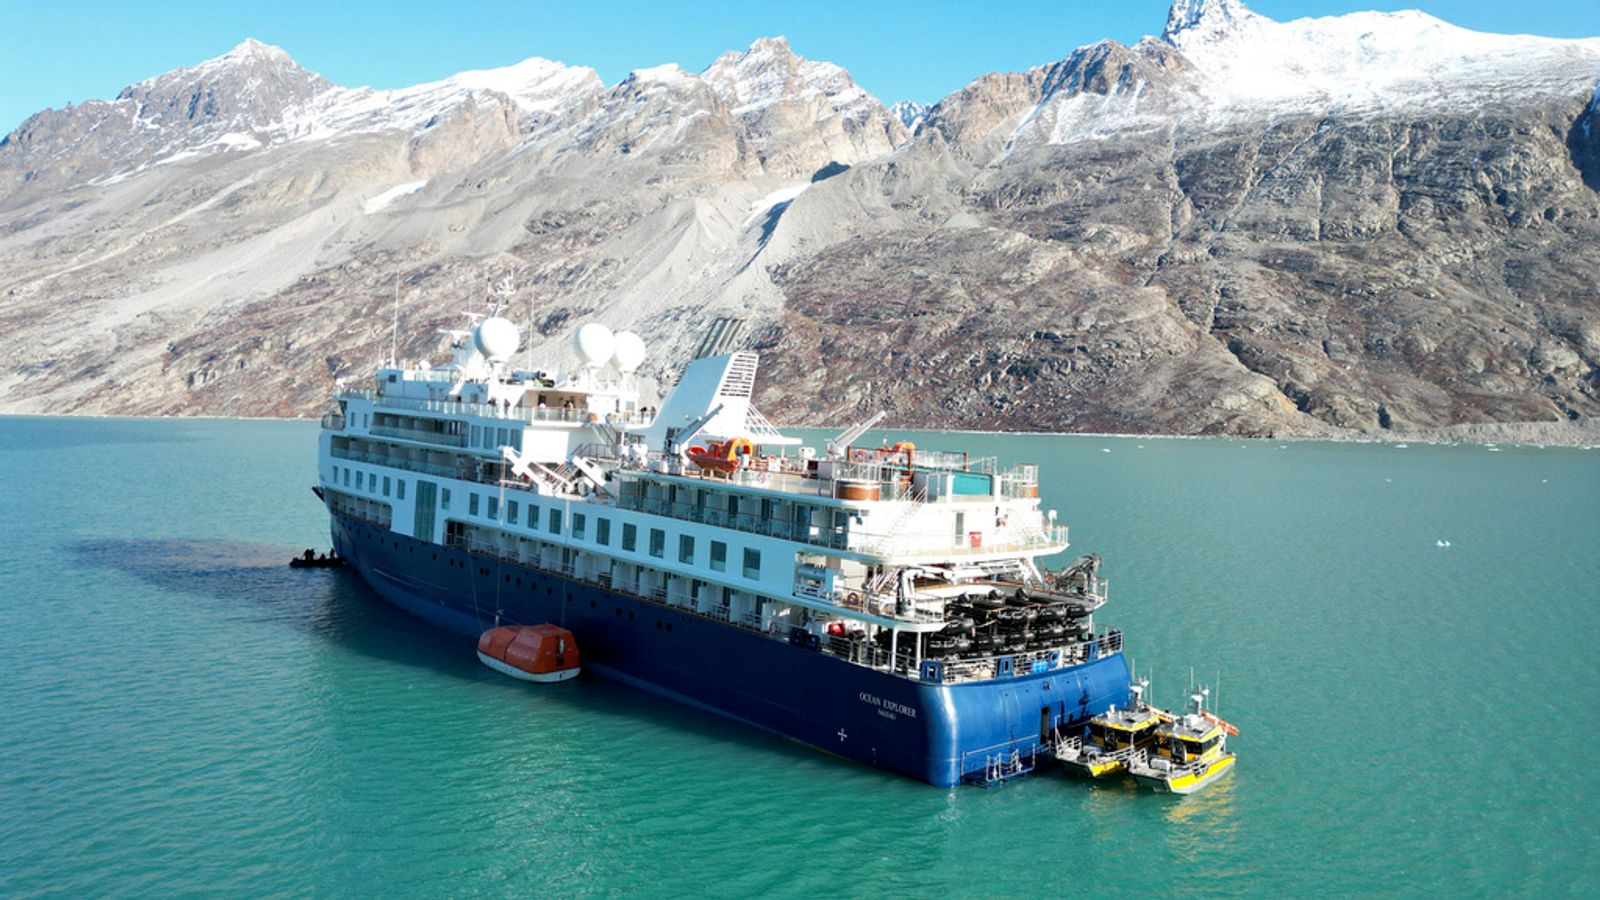 Stranded cruise ship the Ocean Explorer freed three days after running aground in Greenland